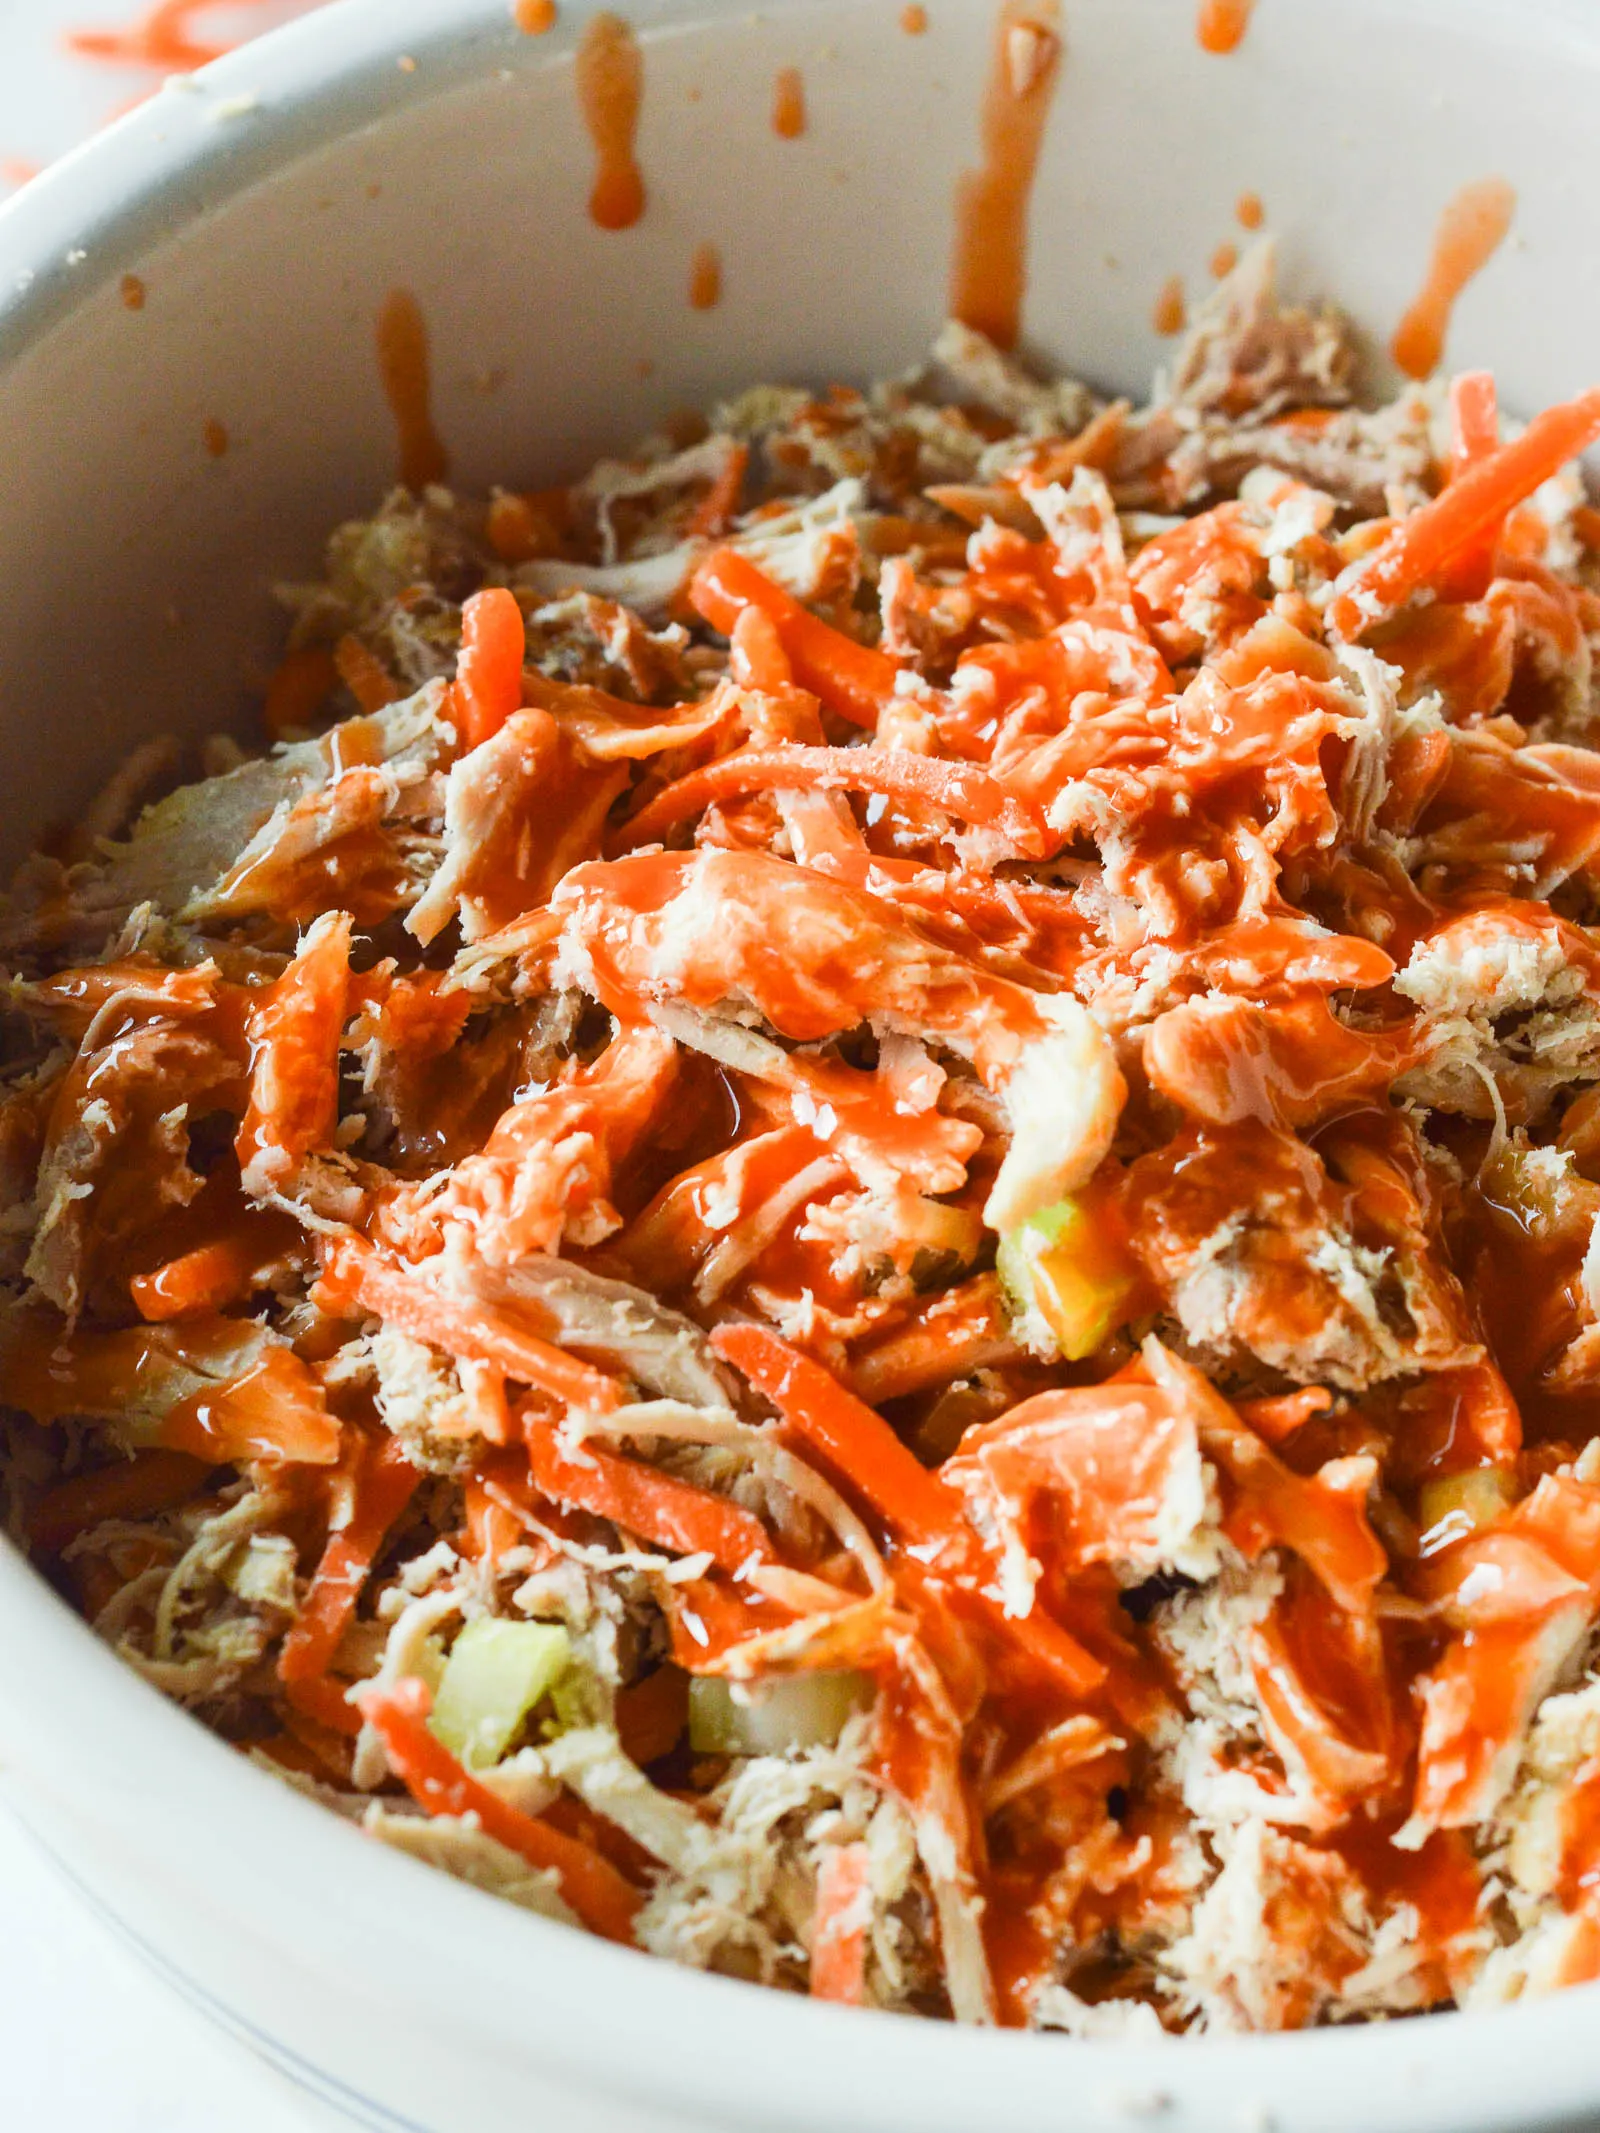 Shredded chicken, matchstick carrots, and chopped celery are doused with hot sauce to add a little extra heat to Buffalo Chicken Salad Sandwiches